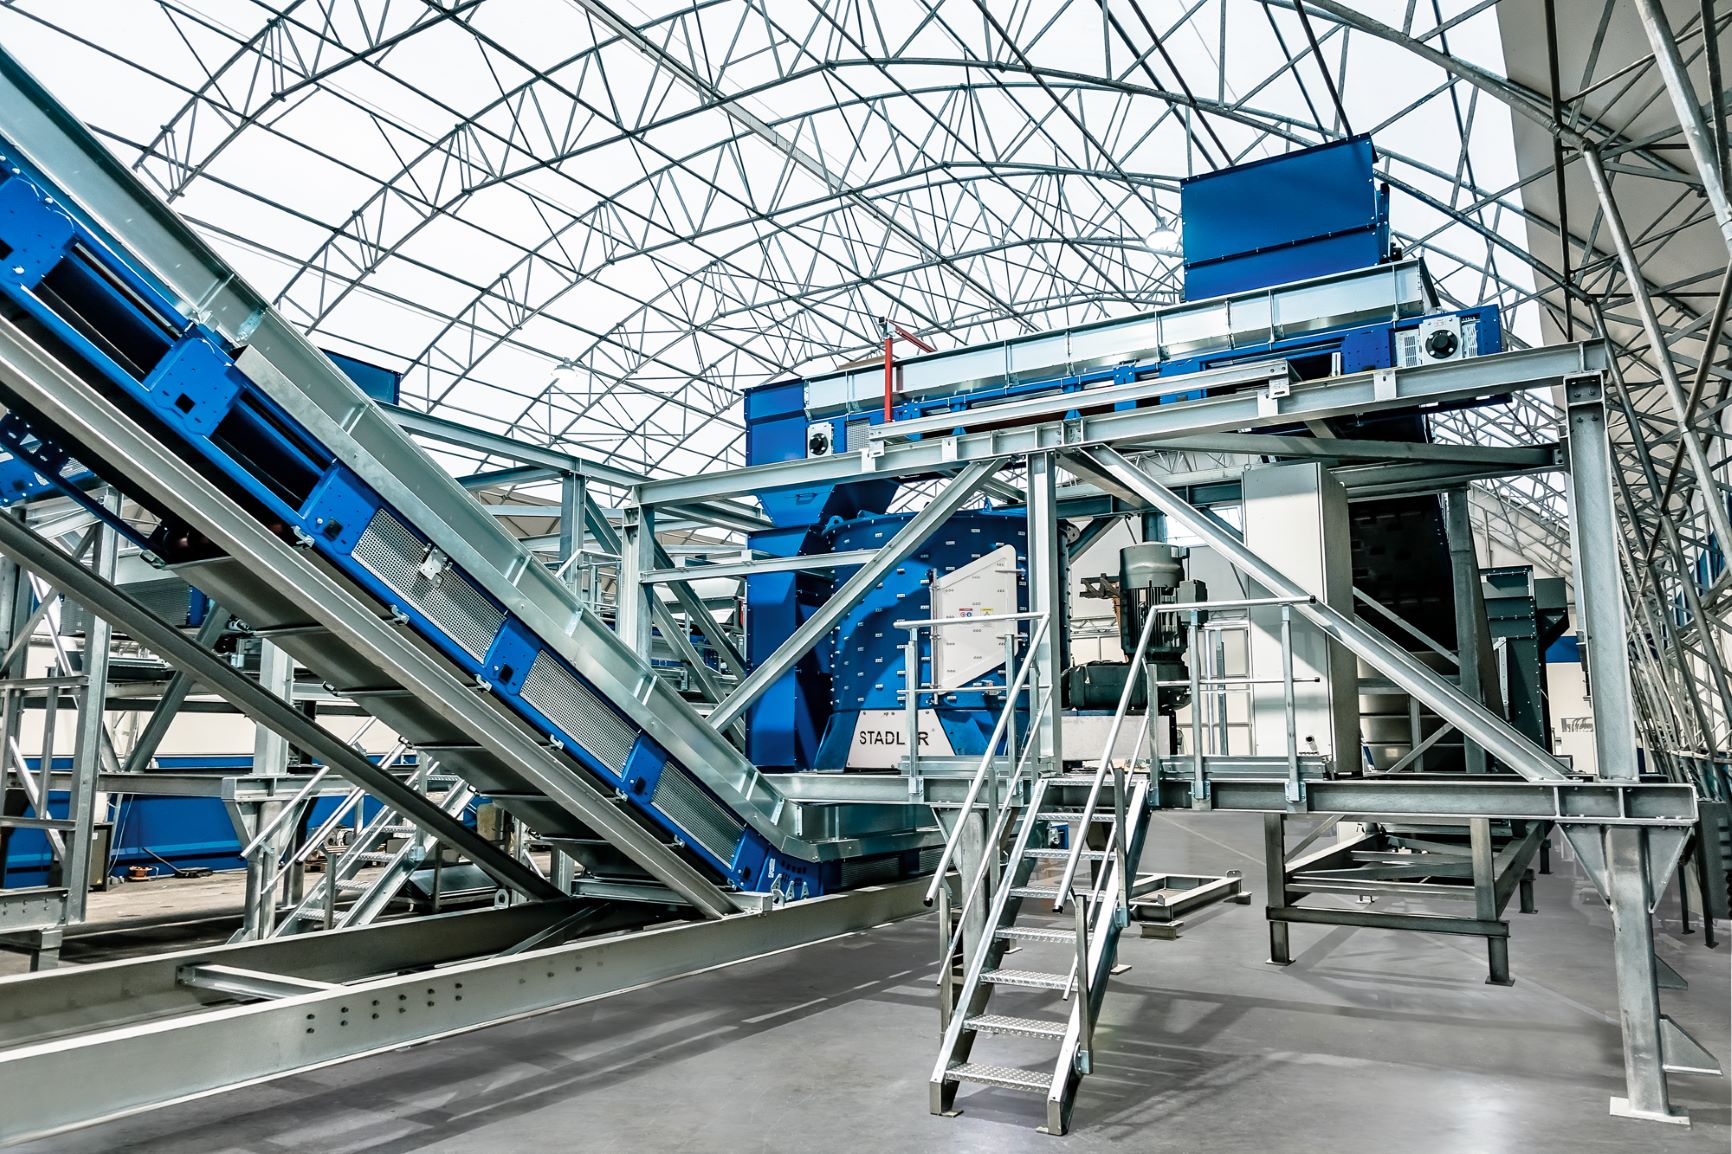 Stadler shares its vision of the recycling industry